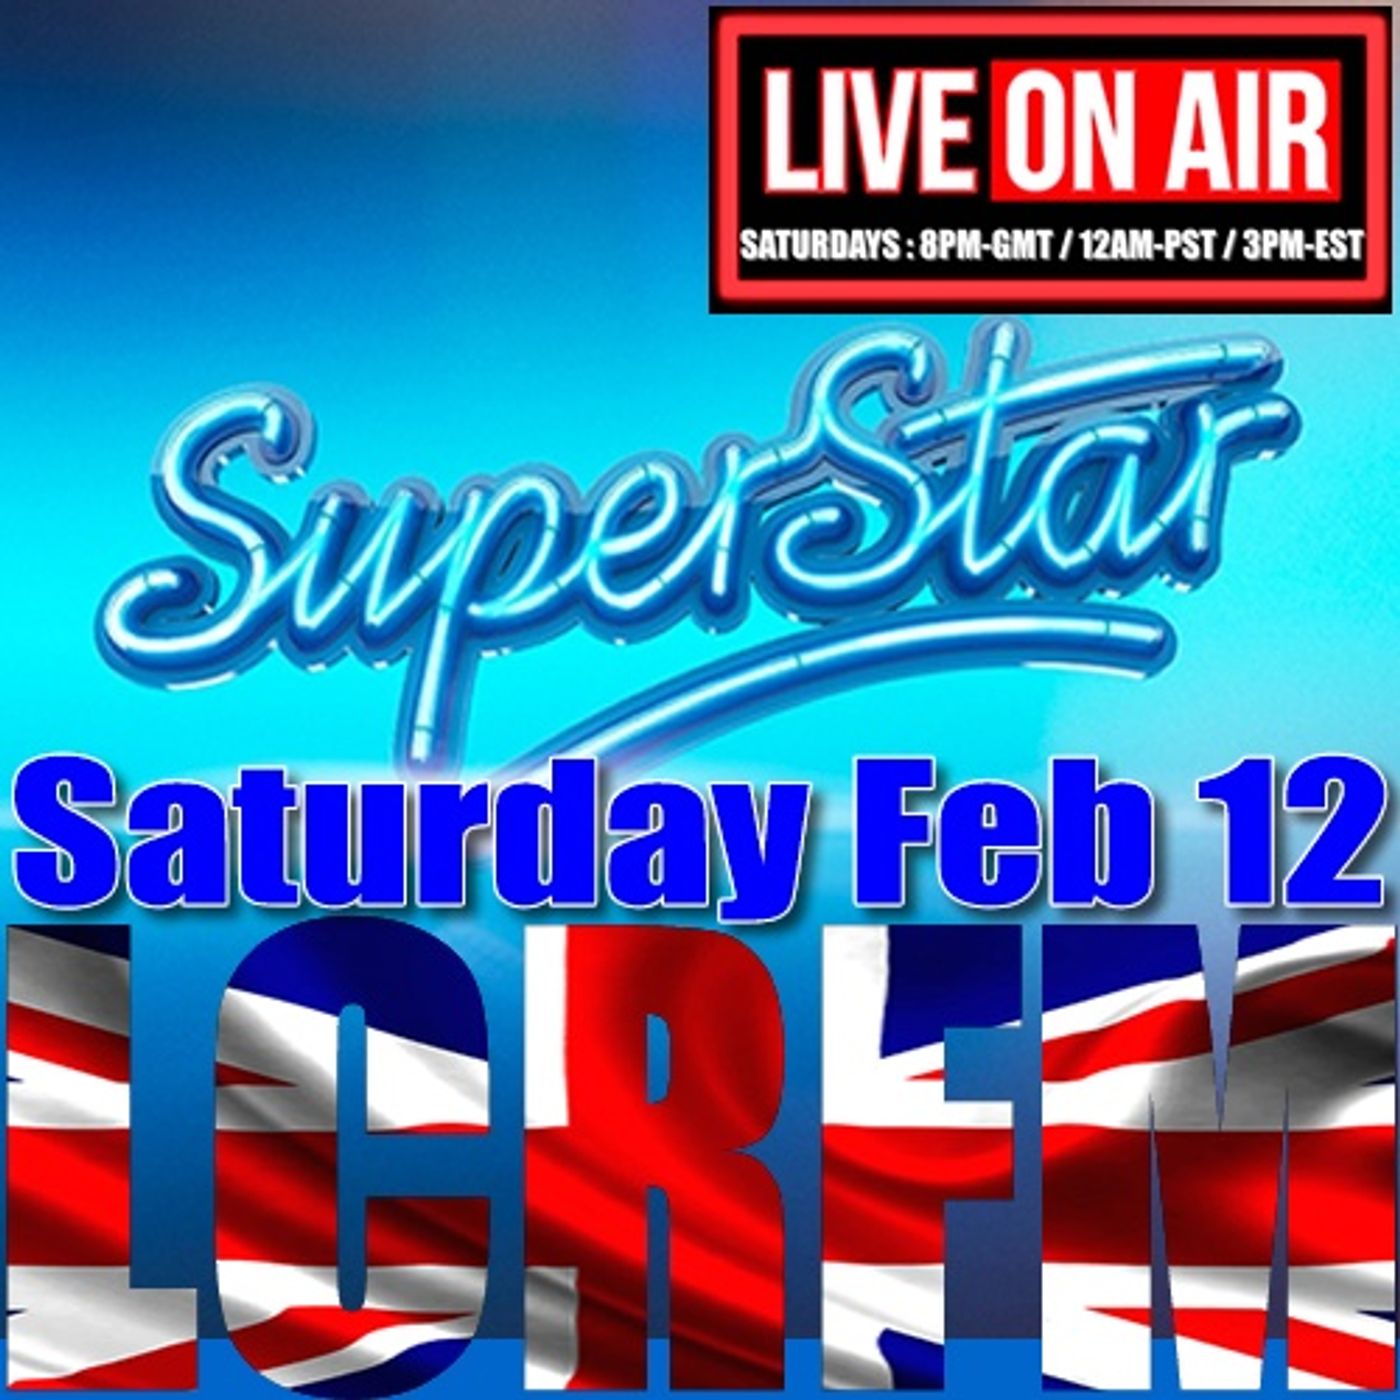 We are "SUPERSTARLIN"  I'm BACK... 8 PM ... GMT ... LCRFM NET